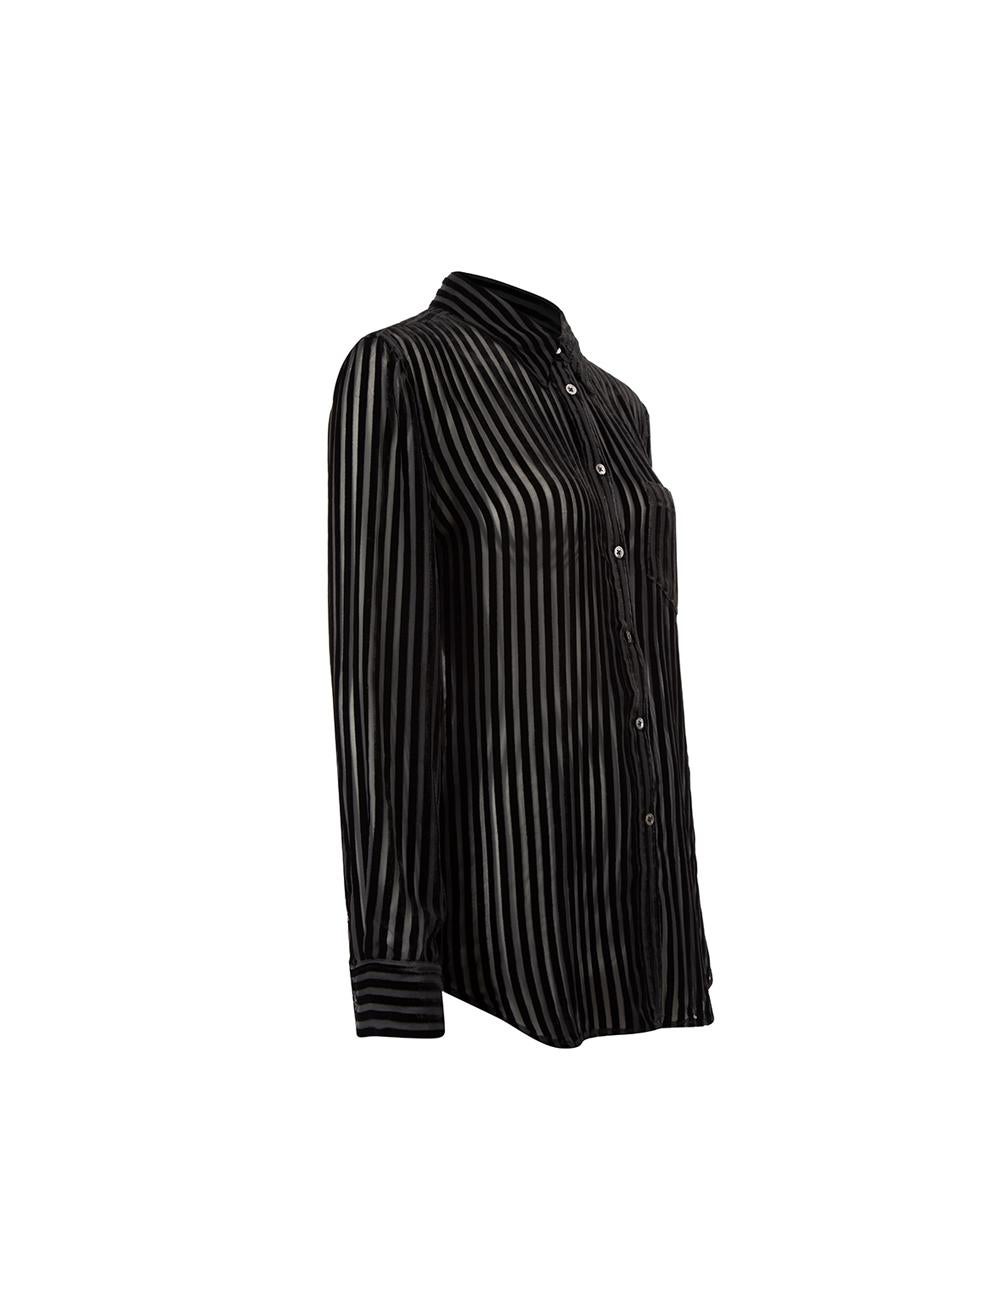 CONDITION is Very good. Minimal wear to shirt is evident. There is a pull to the fabric at the back of the shirt on this used Equipment designer resale item. 



Details


Black

Velvet

Long sleeves sheer shirt

Striped

Front button up